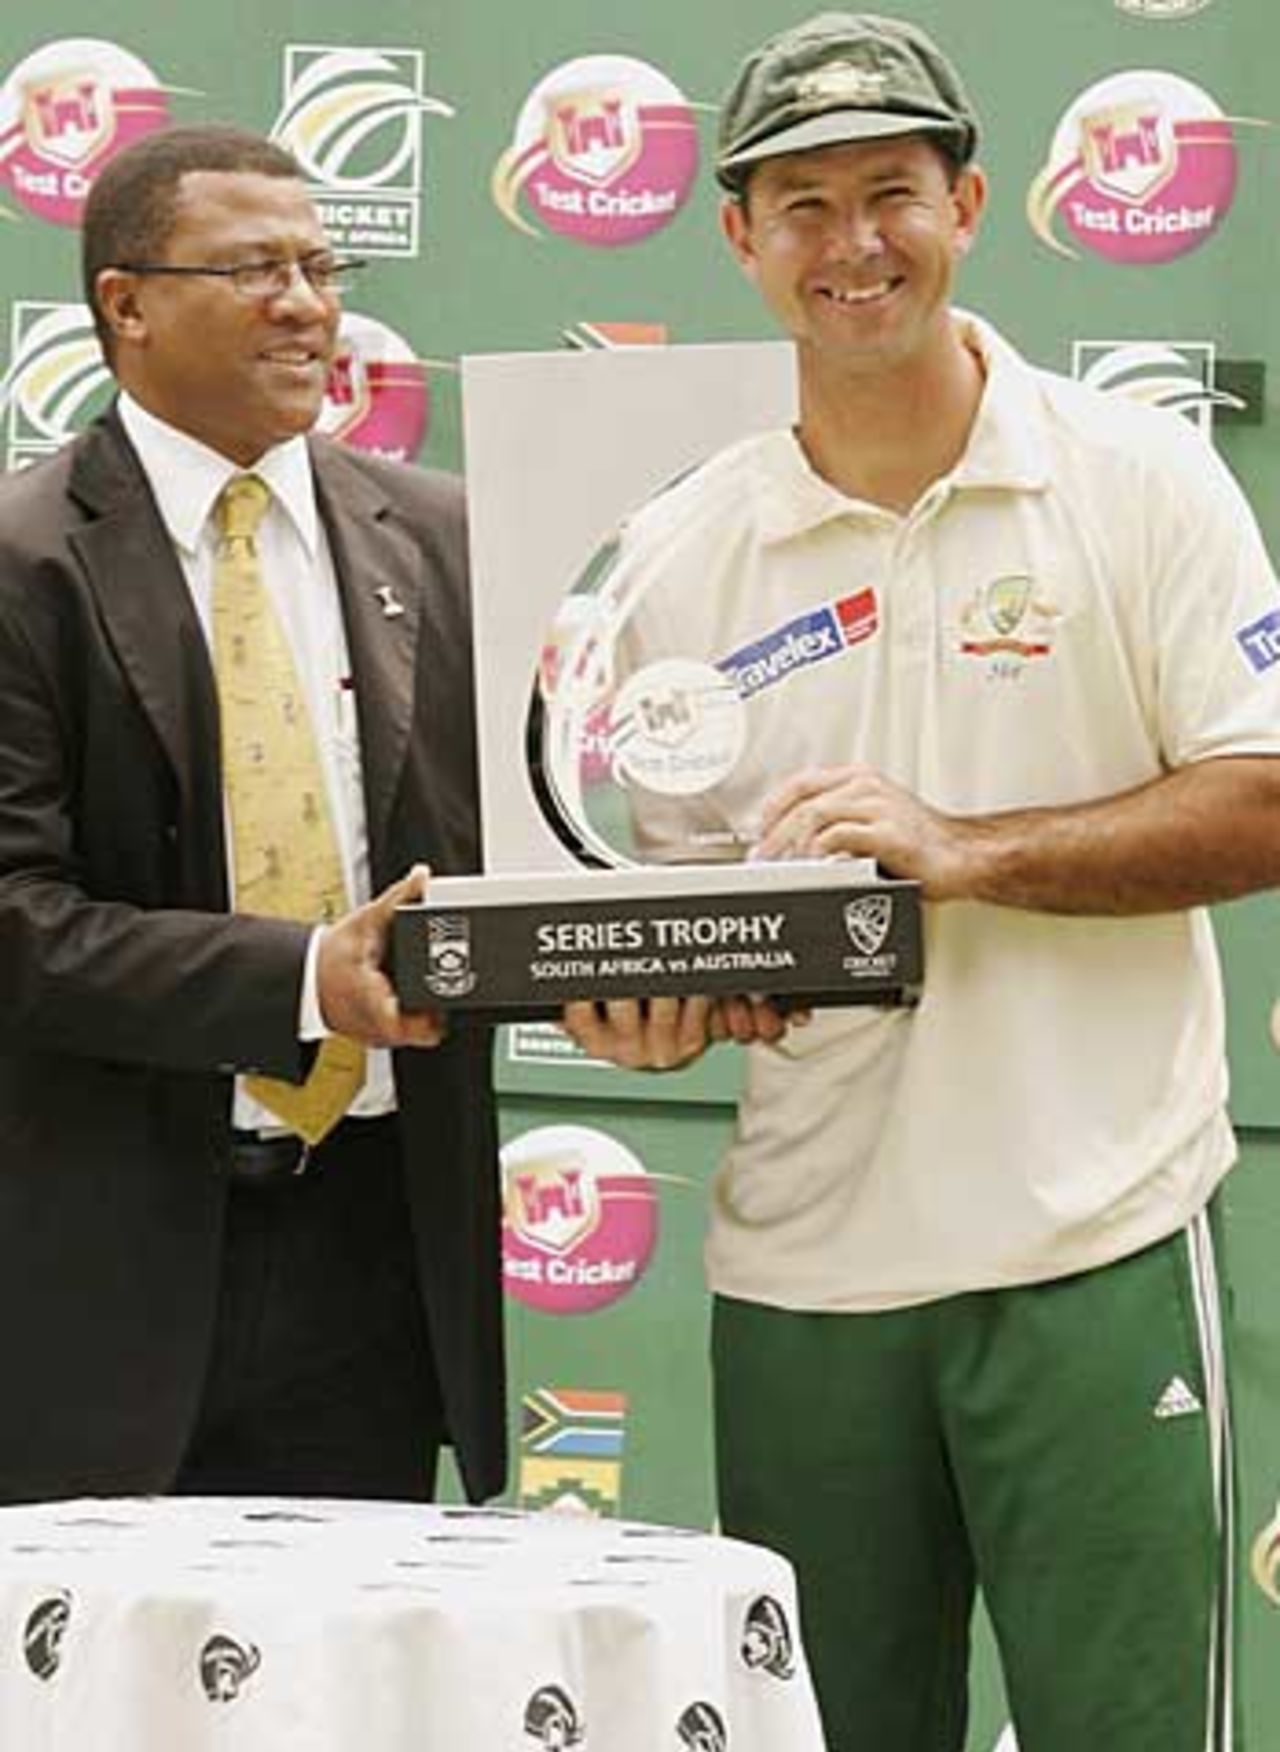 Ricky Ponting with the series trophy after beating South Africa 3-0, South Africa v Australia, 3rd Test, Johannesburg, 5th day, April 4, 2006